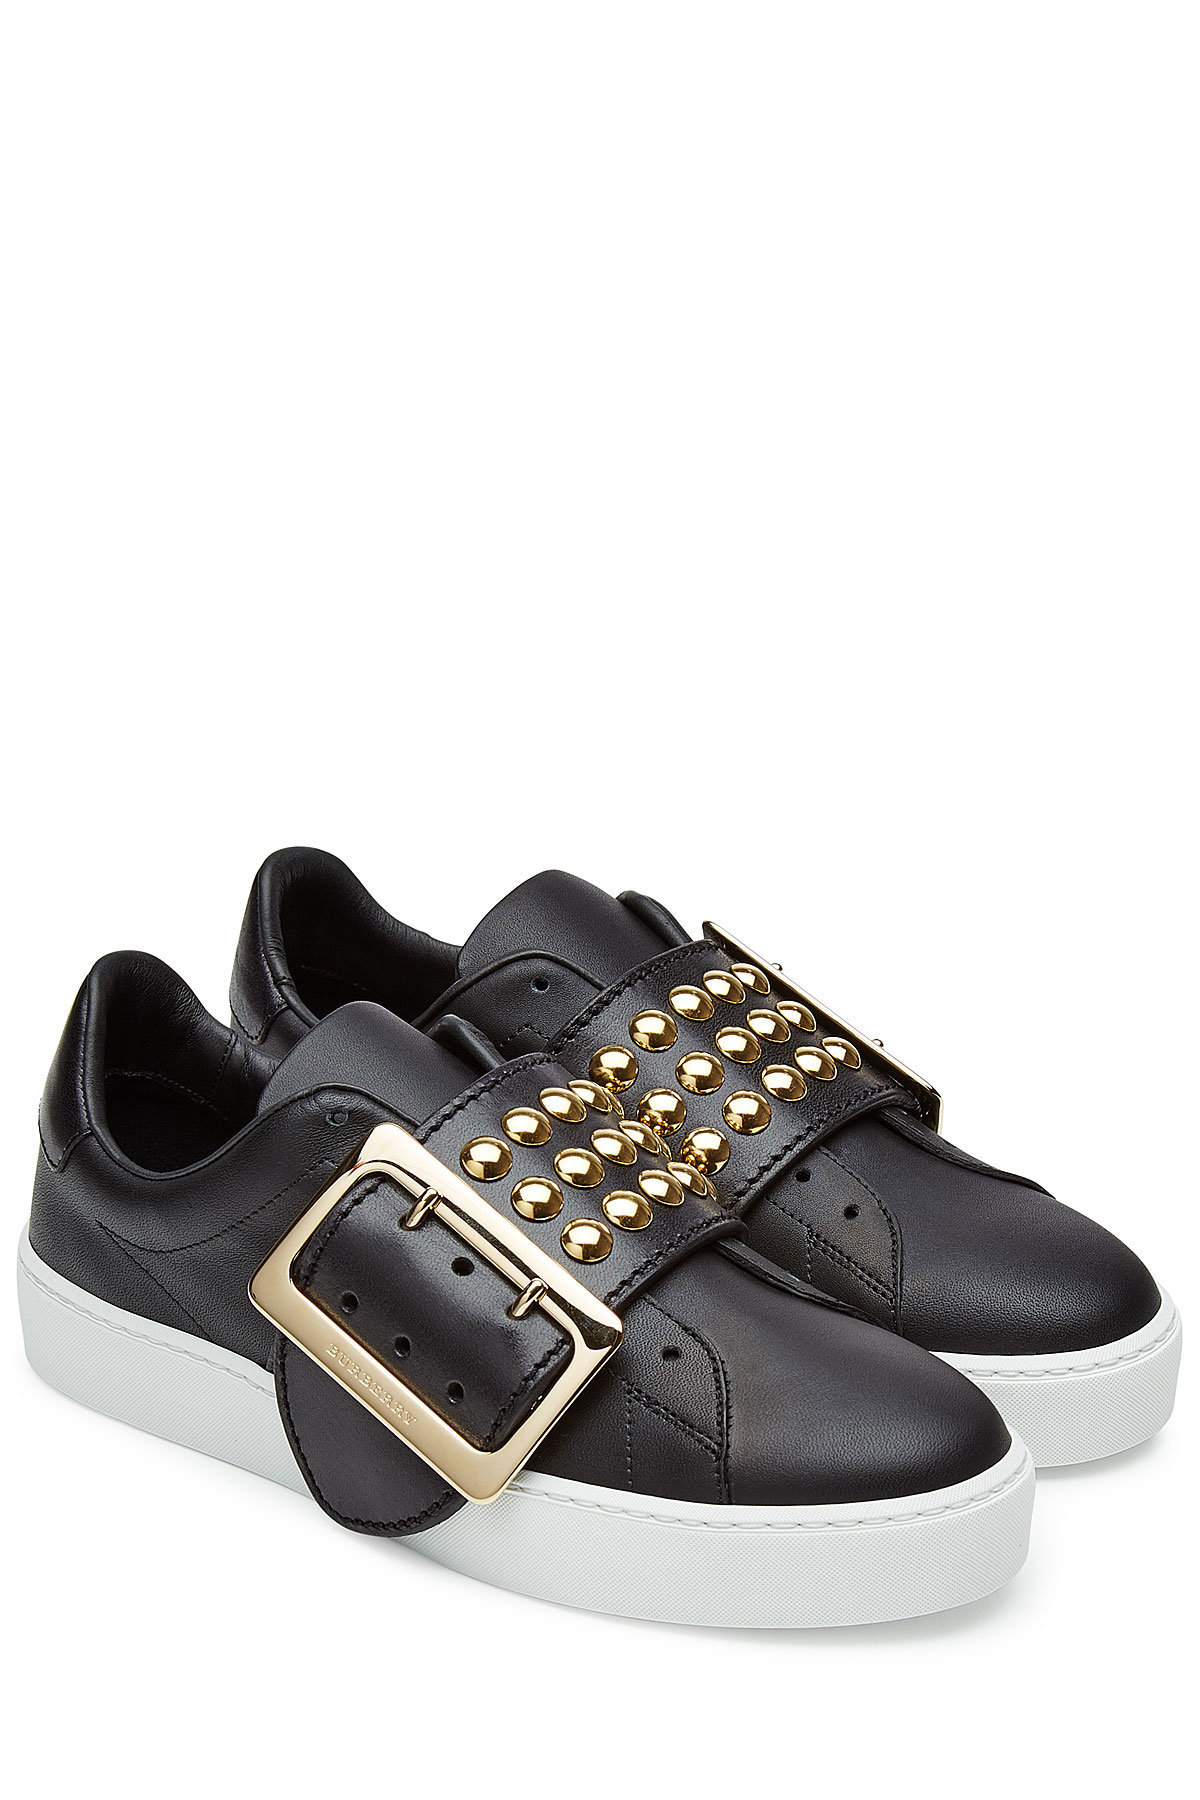 Burberry - Platform Sneakers with Stud Embellishment